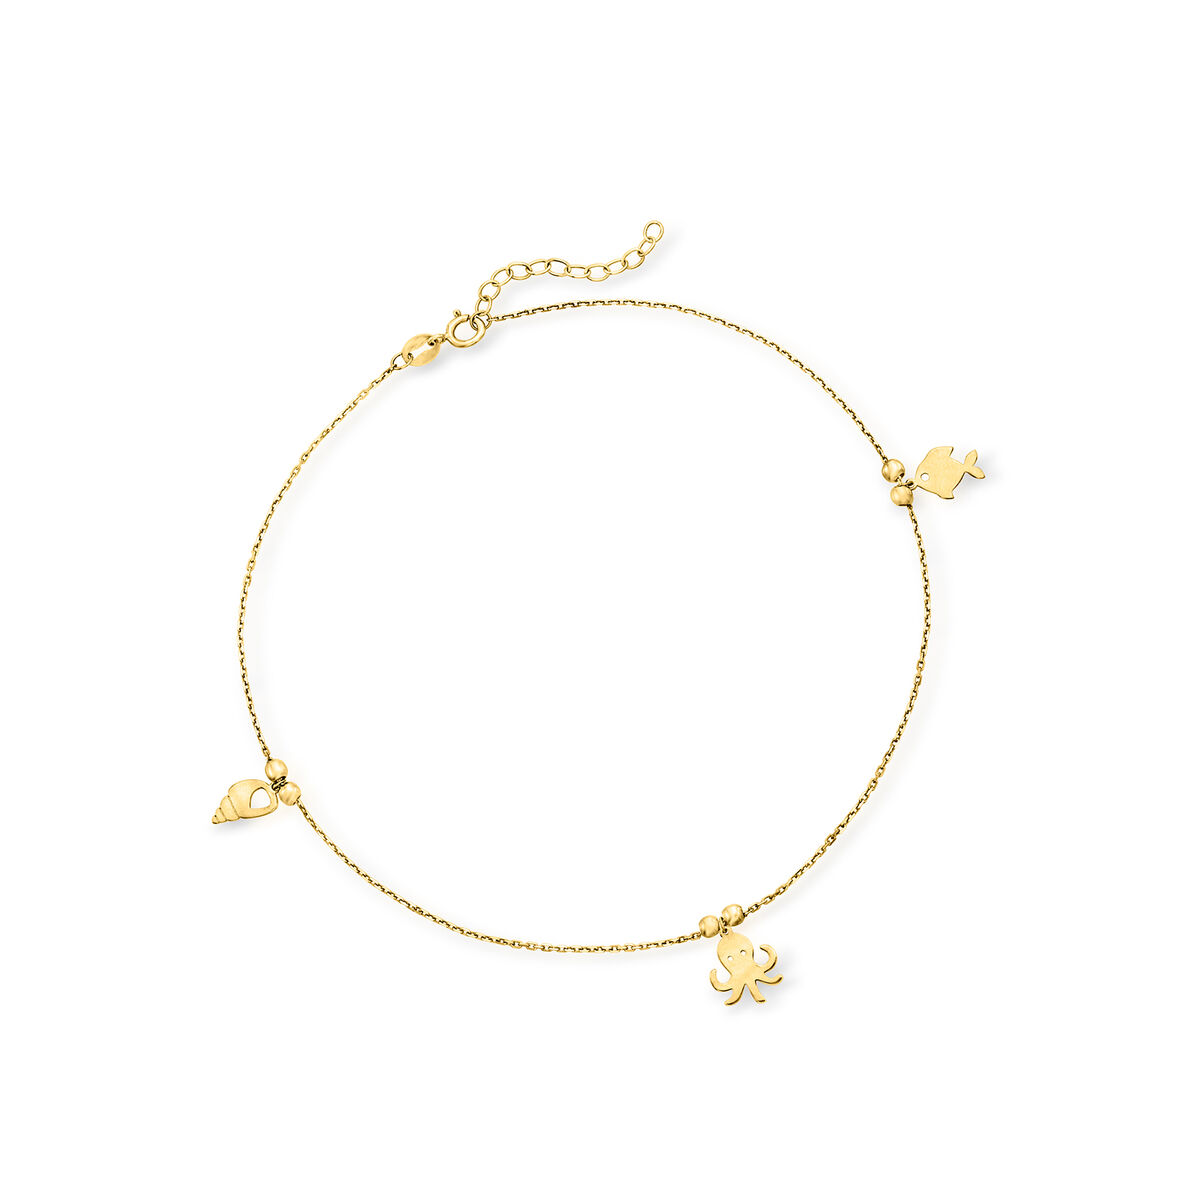 Italian 14kt Yellow Gold Sea Life Charm Anklet. 9